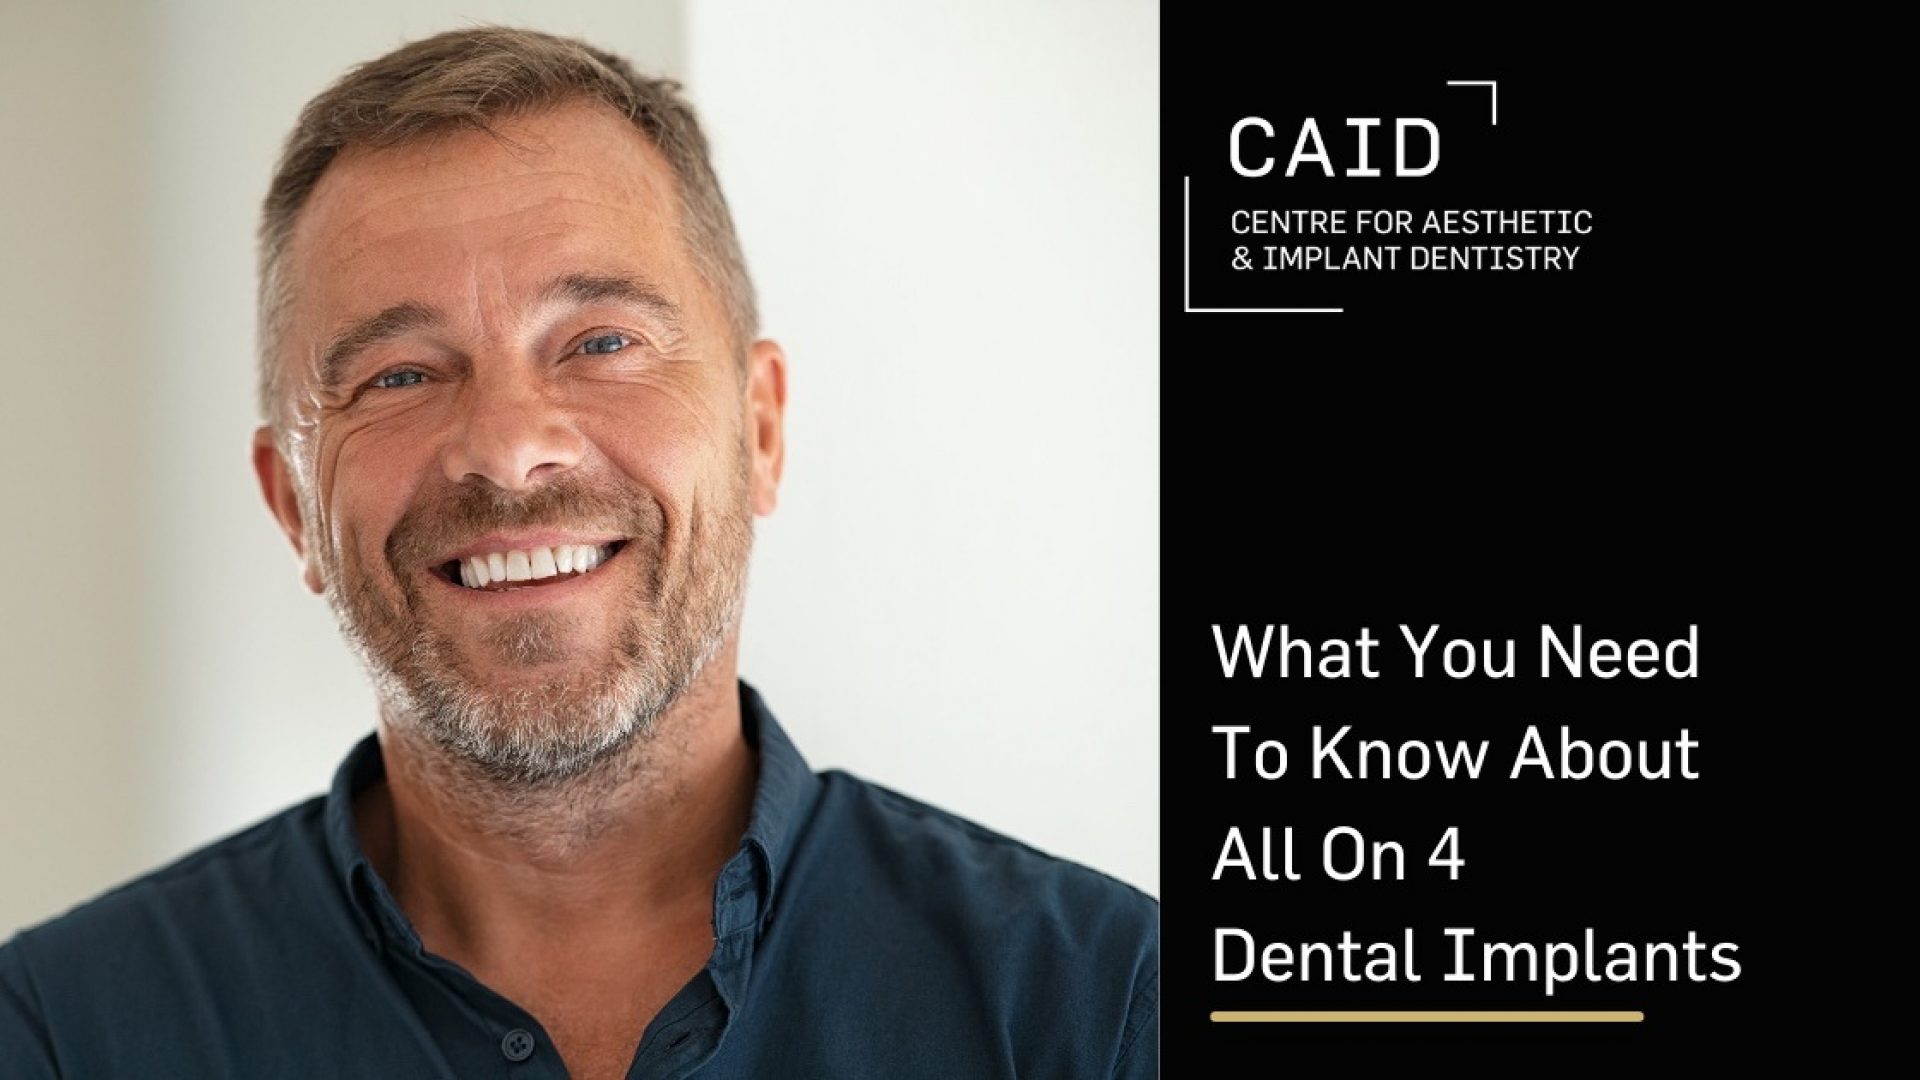 What You Need to Know about All On 4 Dental Implants